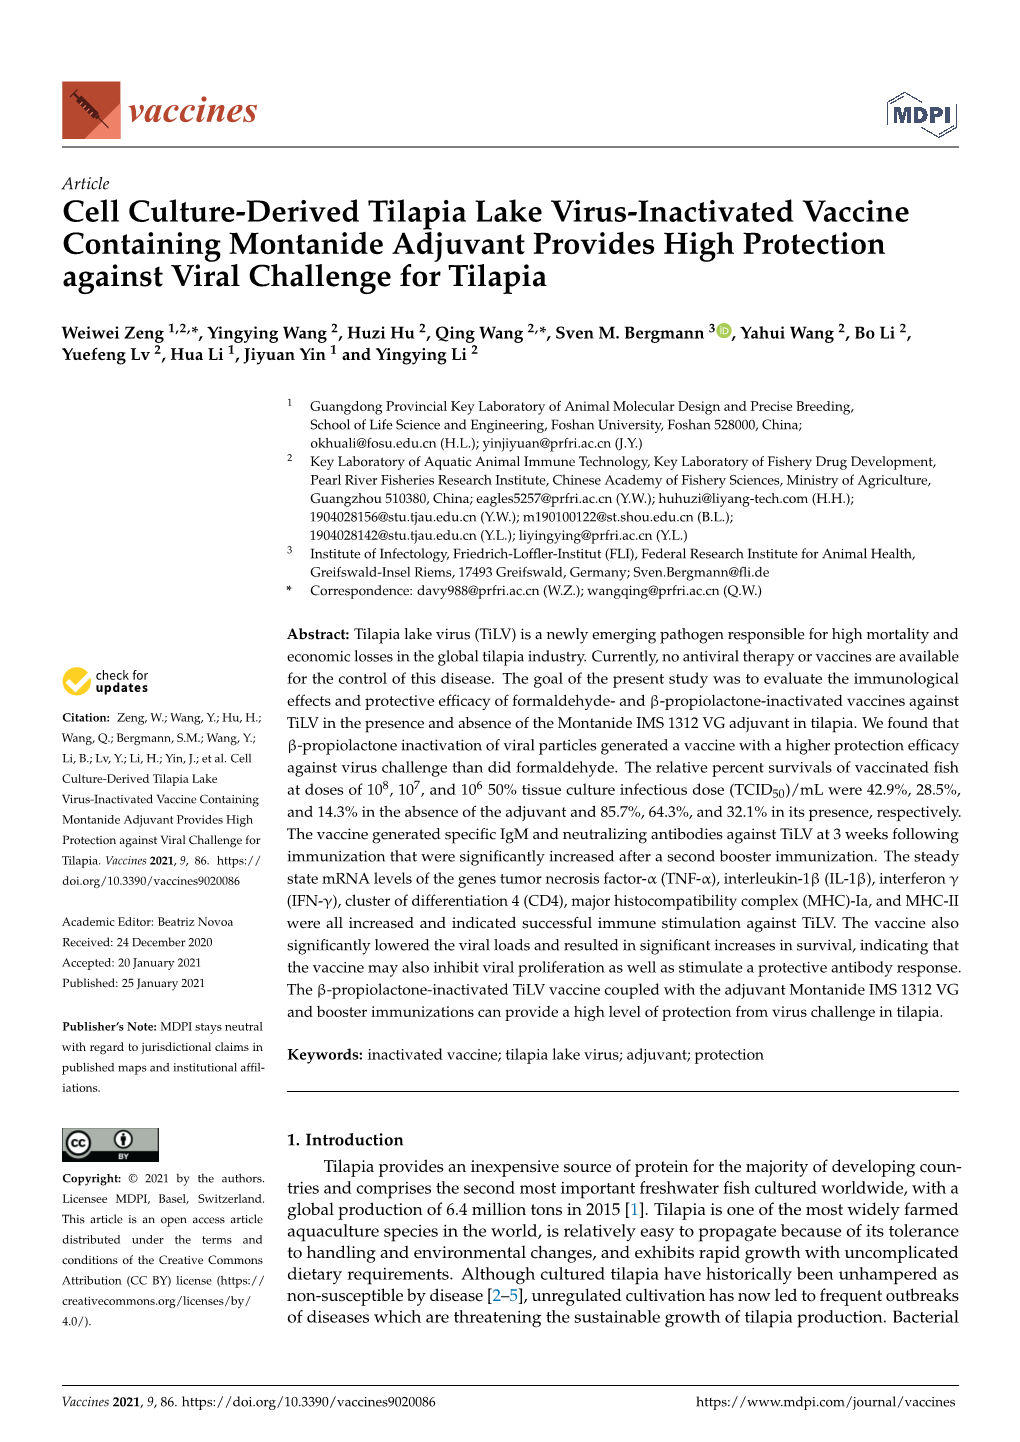 Cell Culture-Derived Tilapia Lake Virus-Inactivated Vaccine Containing Montanide Adjuvant Provides High Protection Against Viral Challenge for Tilapia